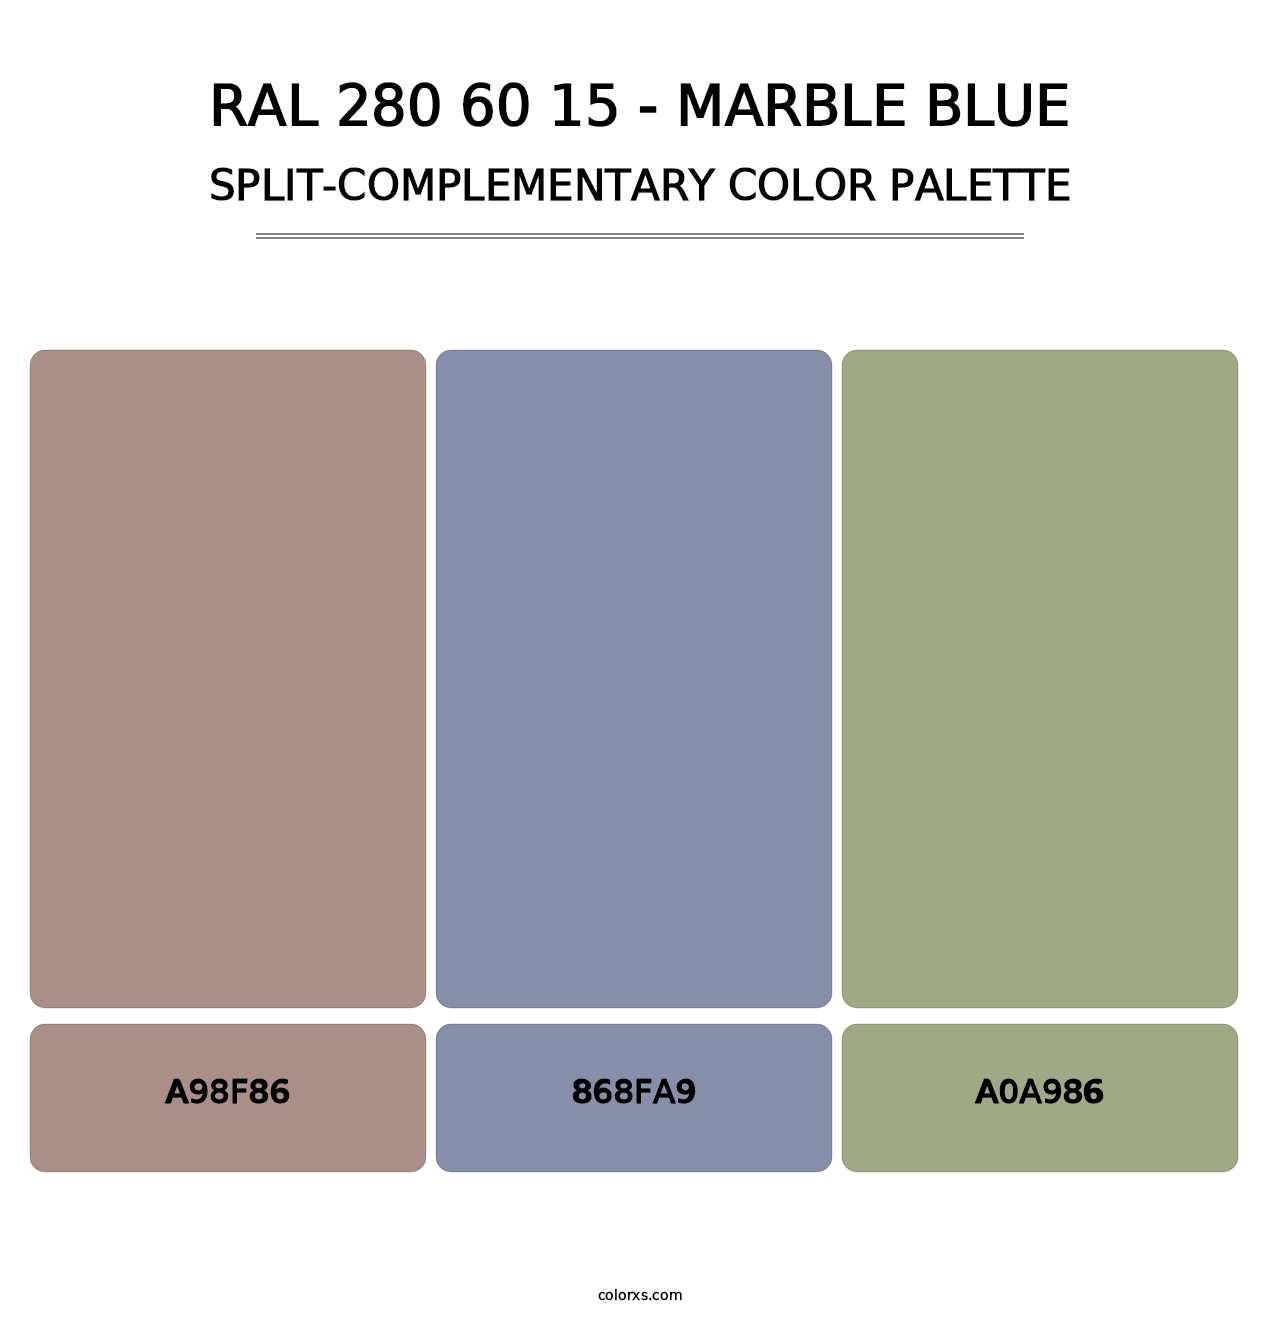 RAL 280 60 15 - Marble Blue - Split-Complementary Color Palette